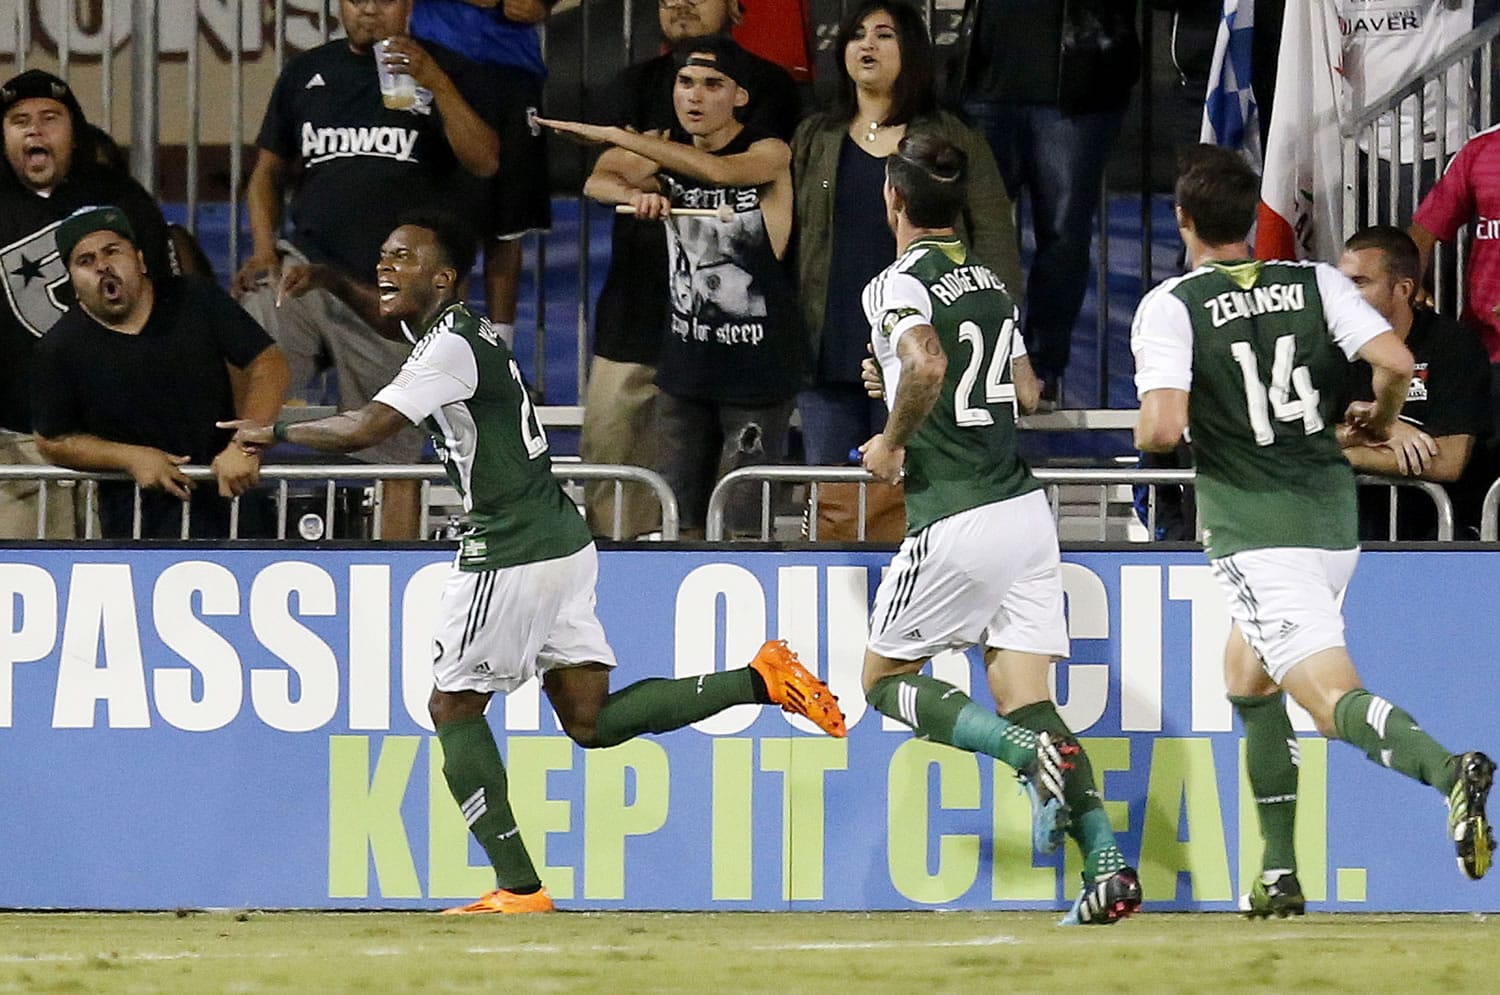 Portland Timbers' Rodney Wallace, left, celebrates with teammates Ben Zemanski (14) and Liam Ridgewell (24) after scoring a goal against the San Jose Earthquakes during the second half in Santa Clara, Calif., Saturday, Oct. 4, 2014. Portland won 2-1.